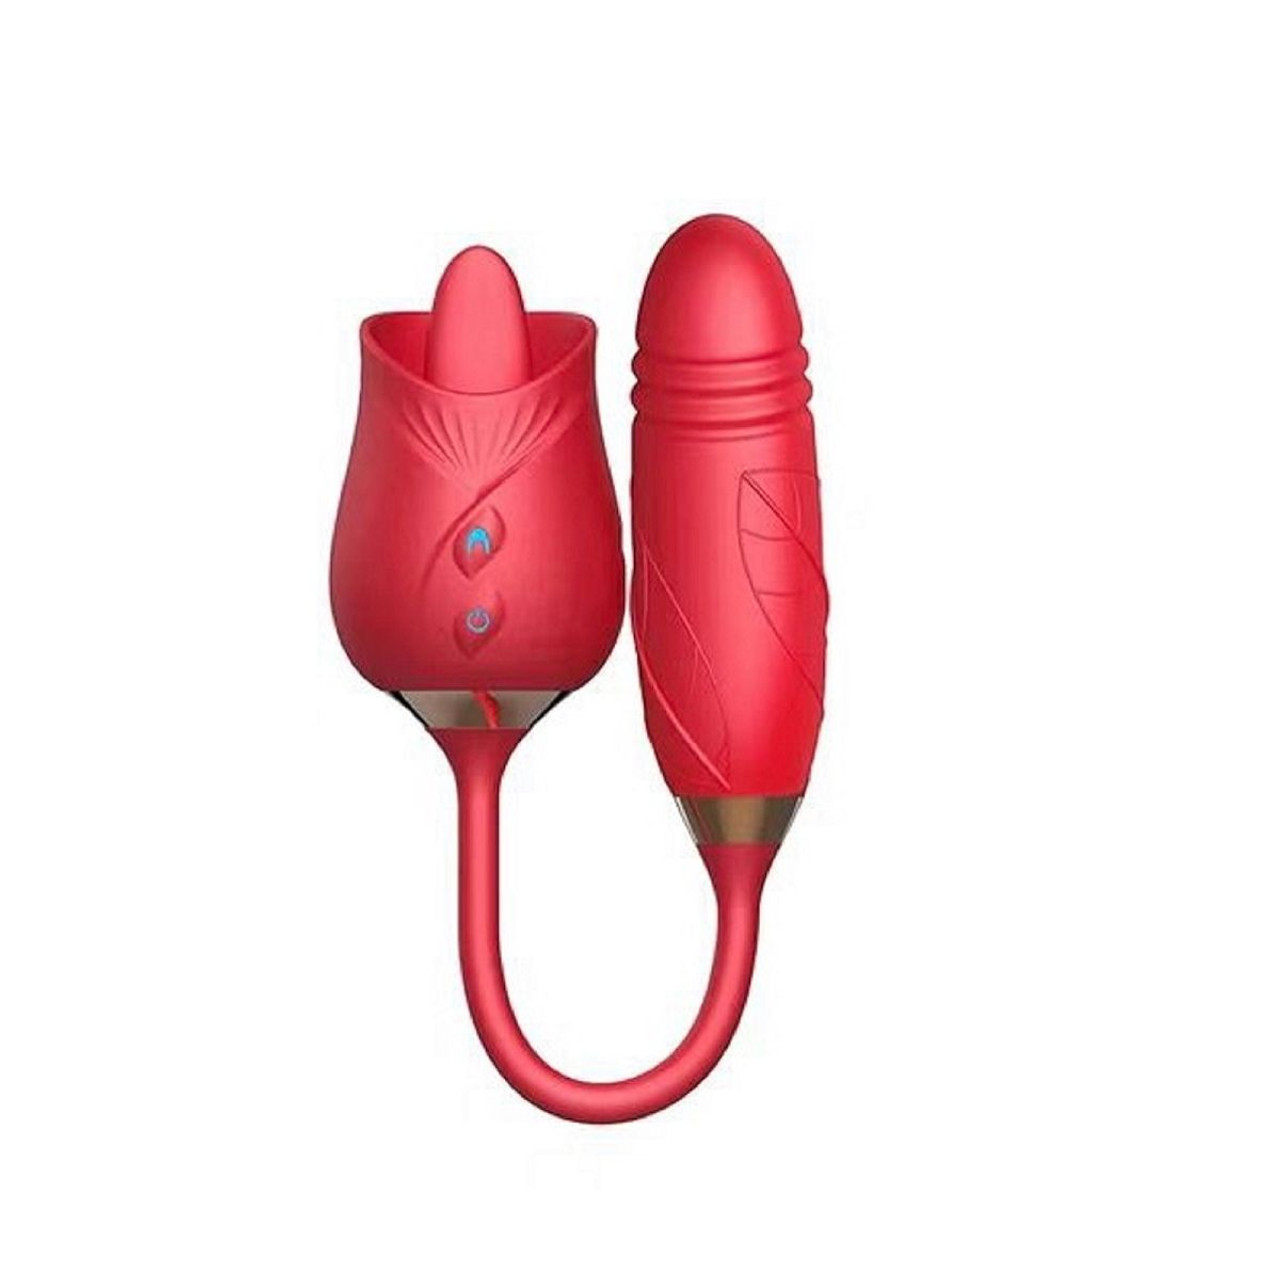 Waterproof 3-in-1 Rose Vibrator Toy product image